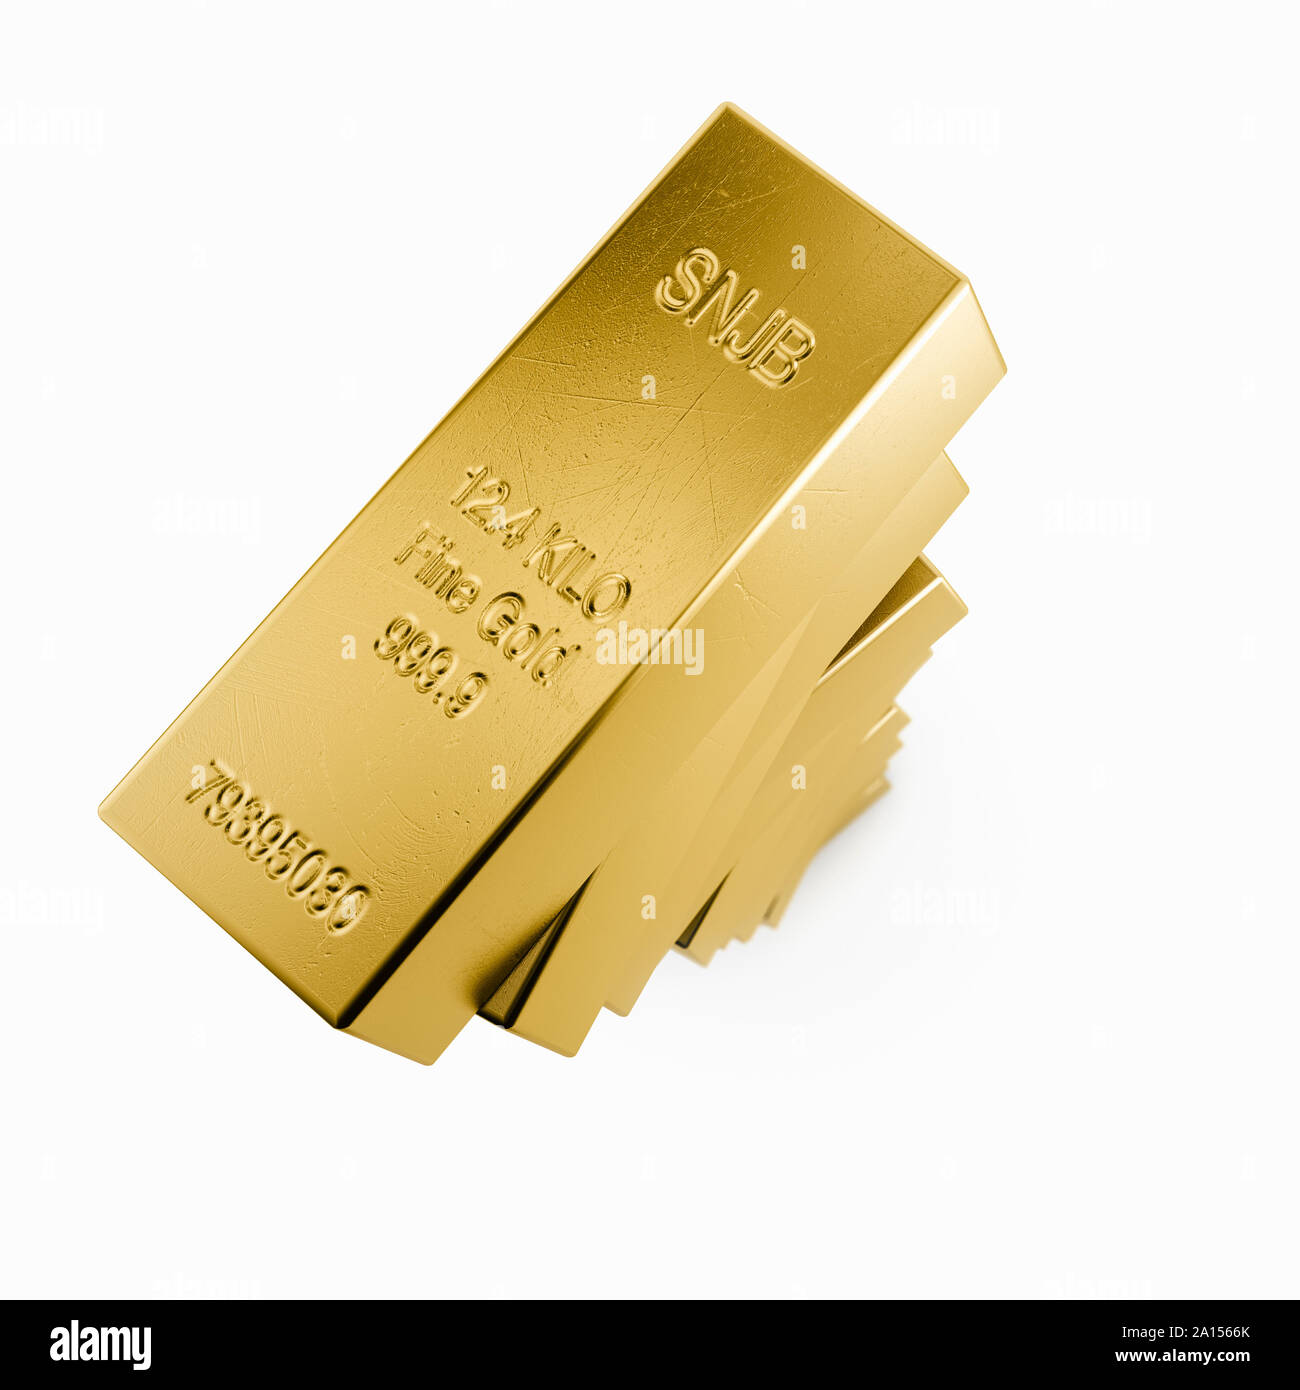 Tall stack of gold bars ingots on a white background Stock Photo